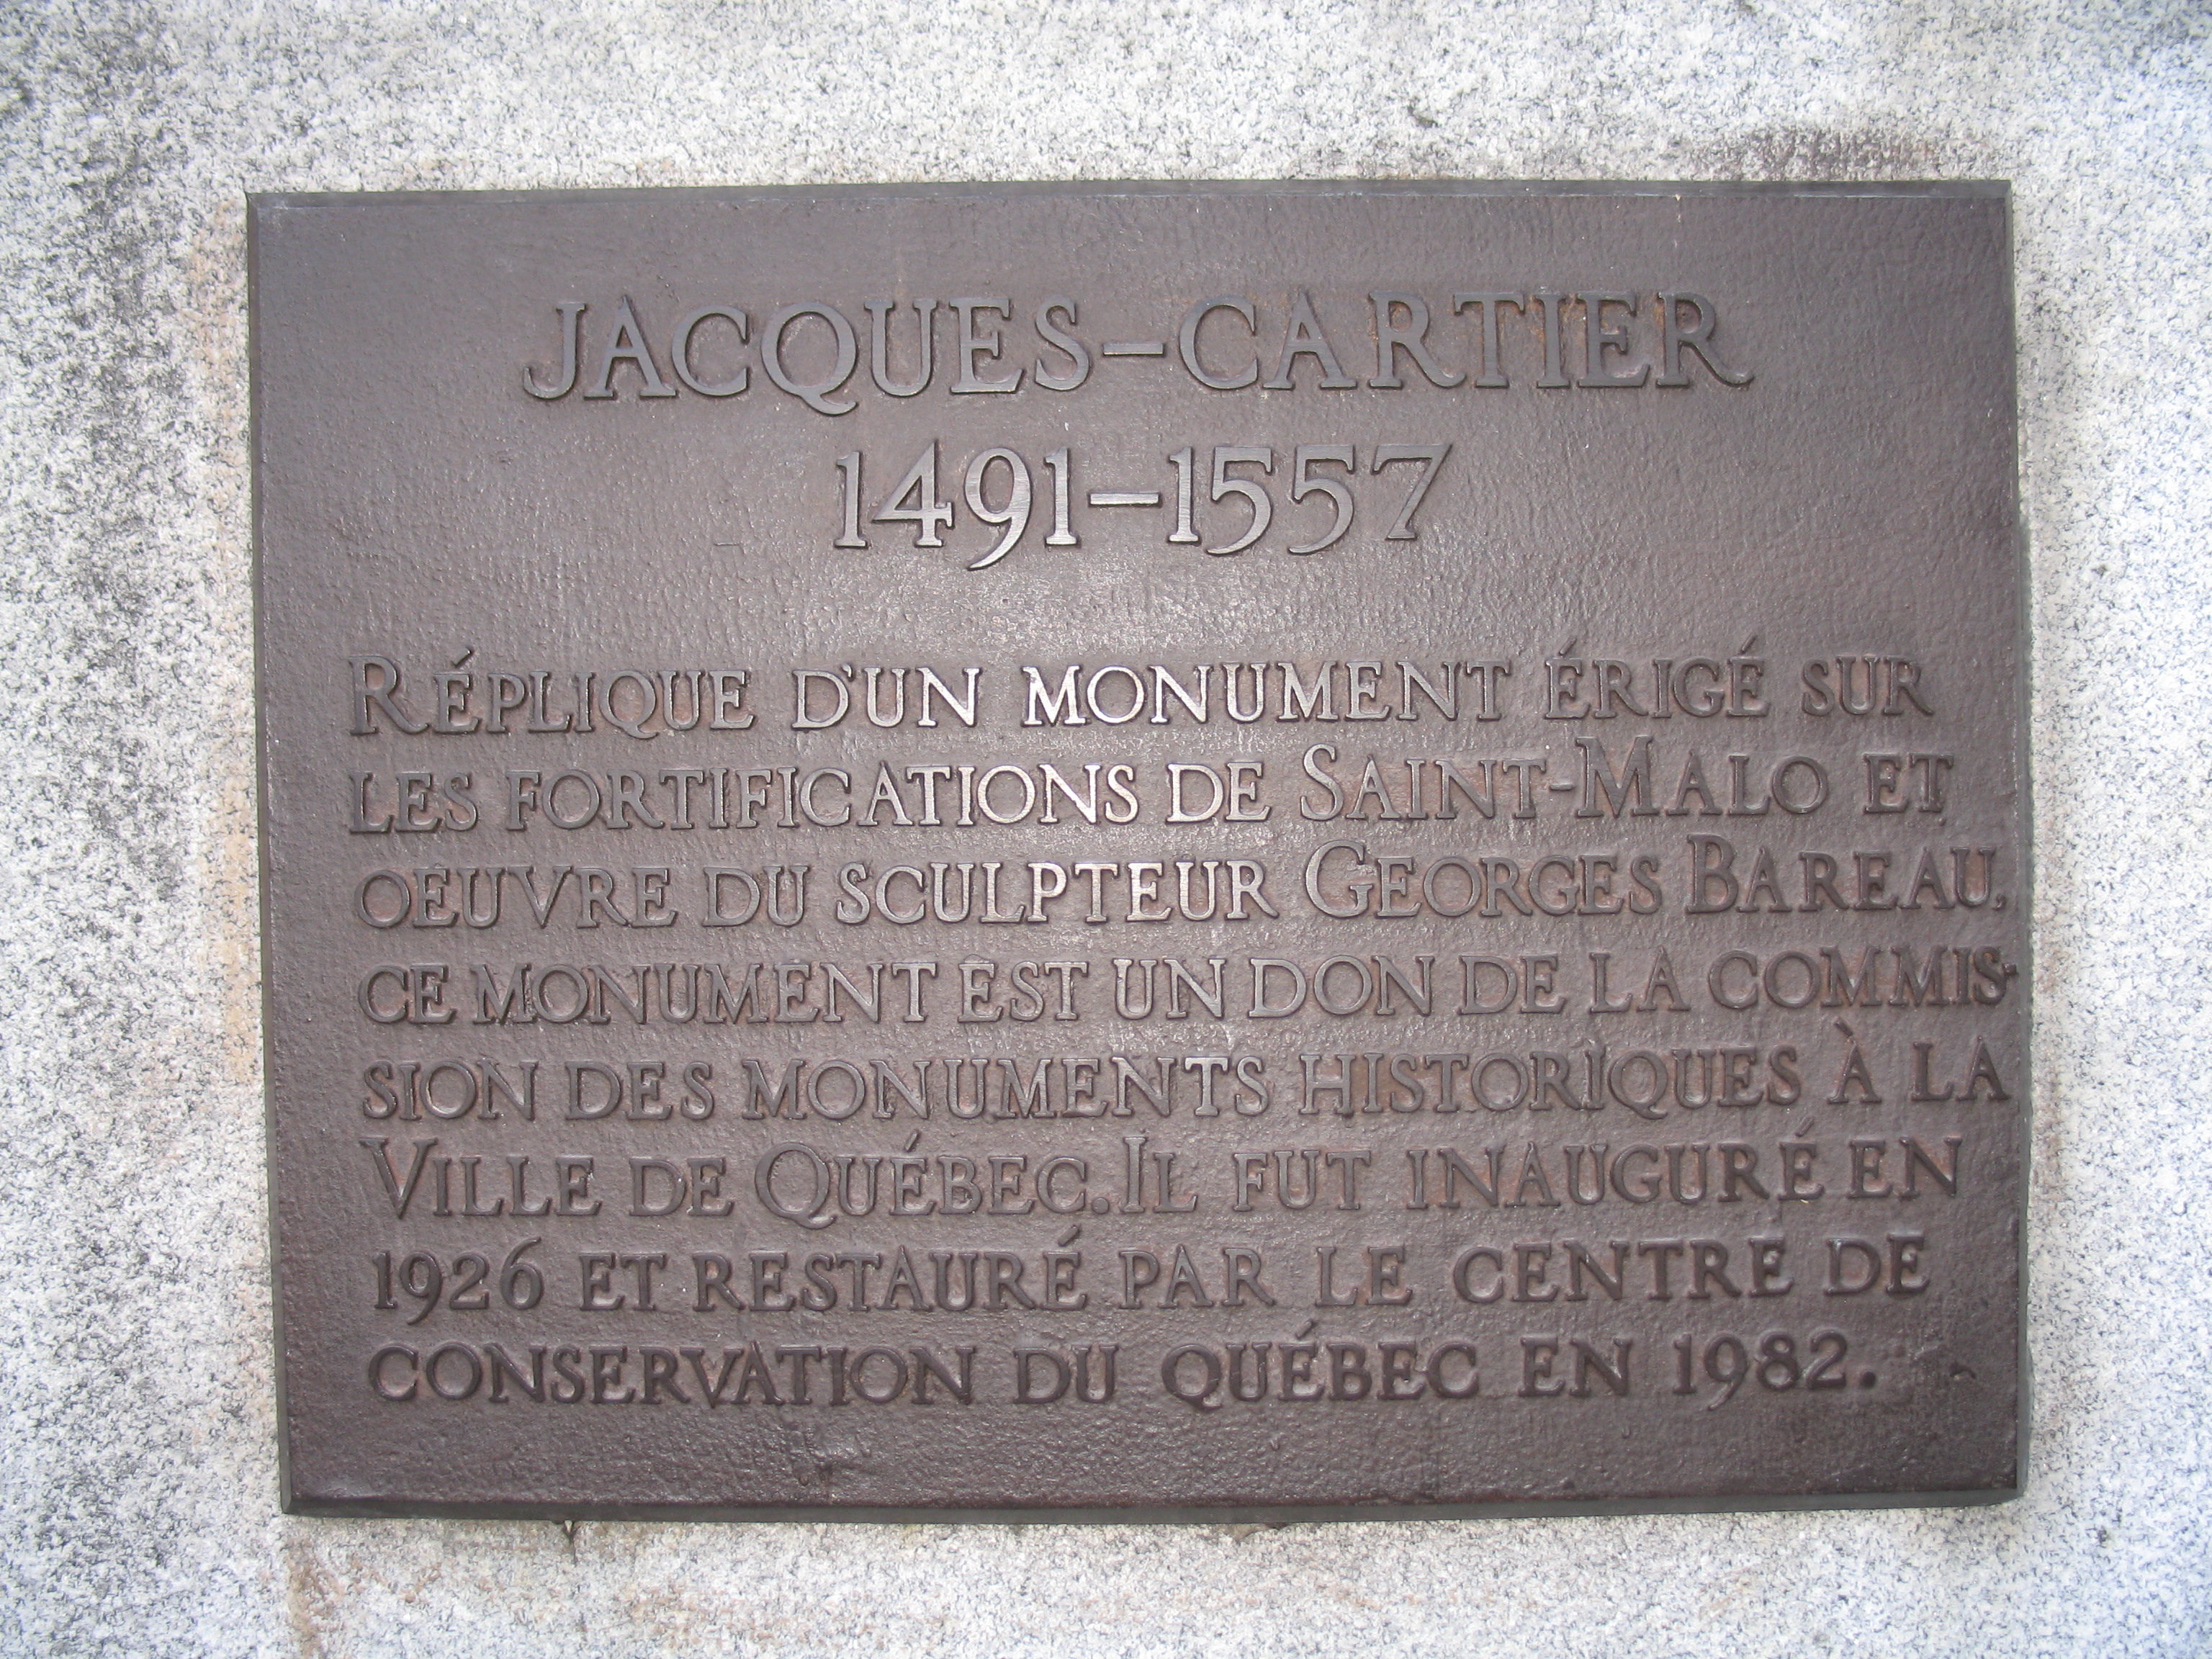 Place Jacques-Cartier + , a major street in the Vieux Port of 